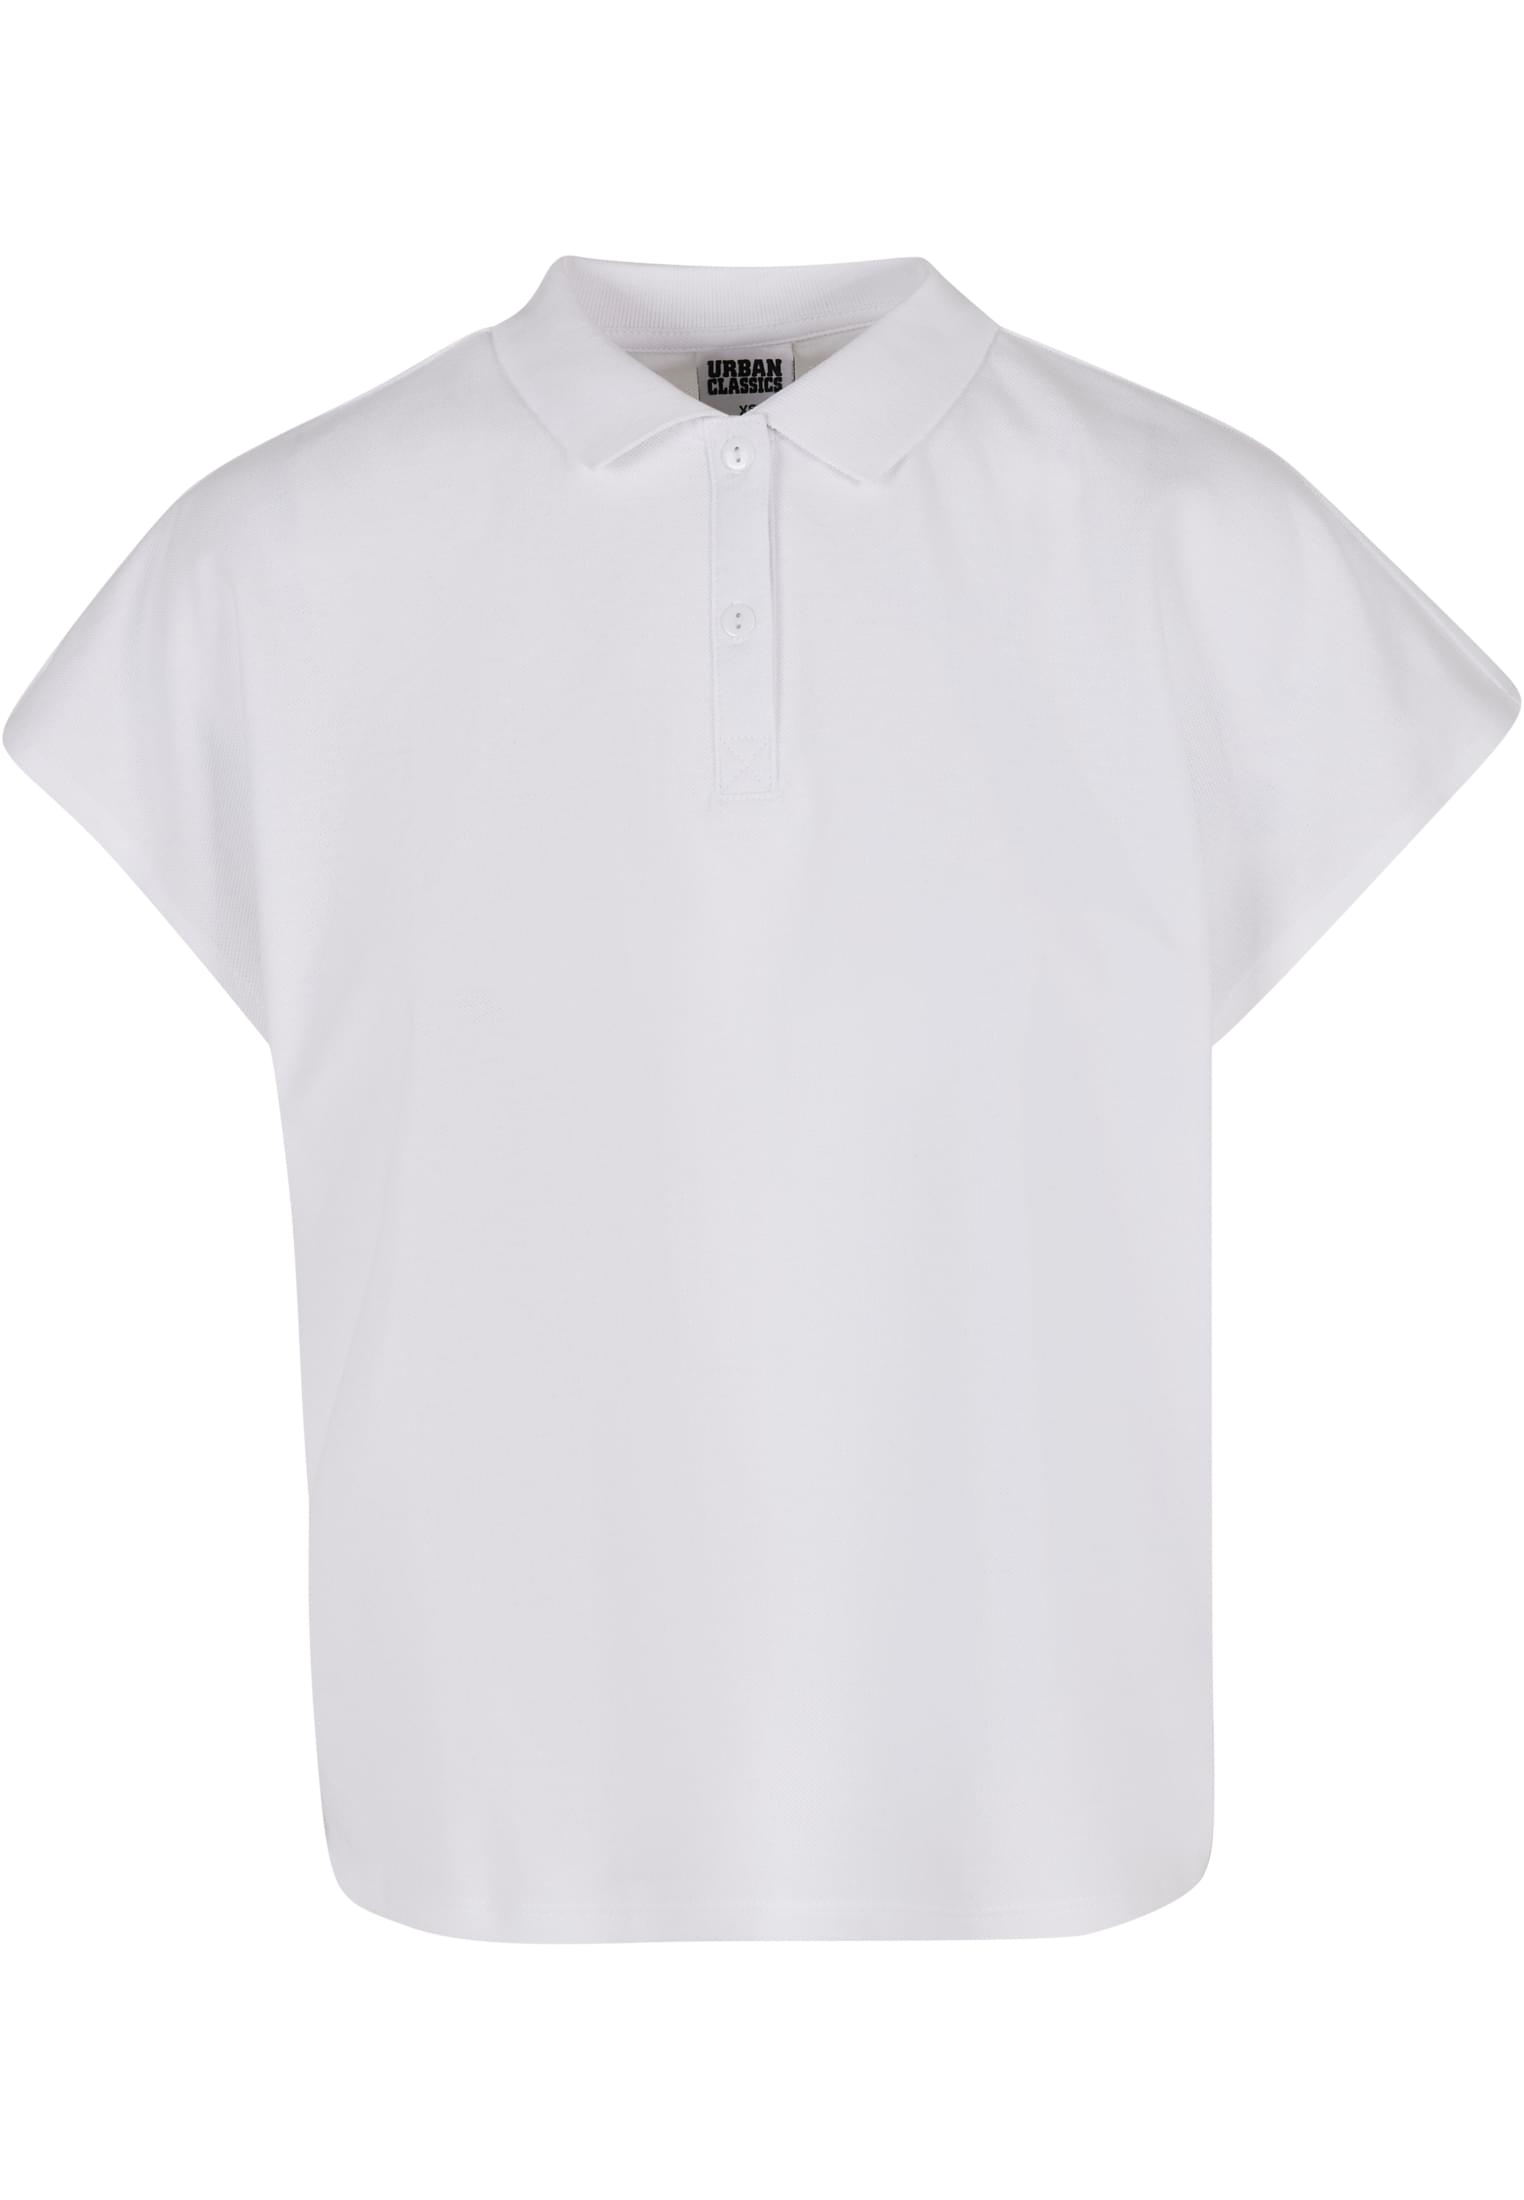 Frauen Ladies Oversized Extended Shoulder Polo Tee in Farbe white